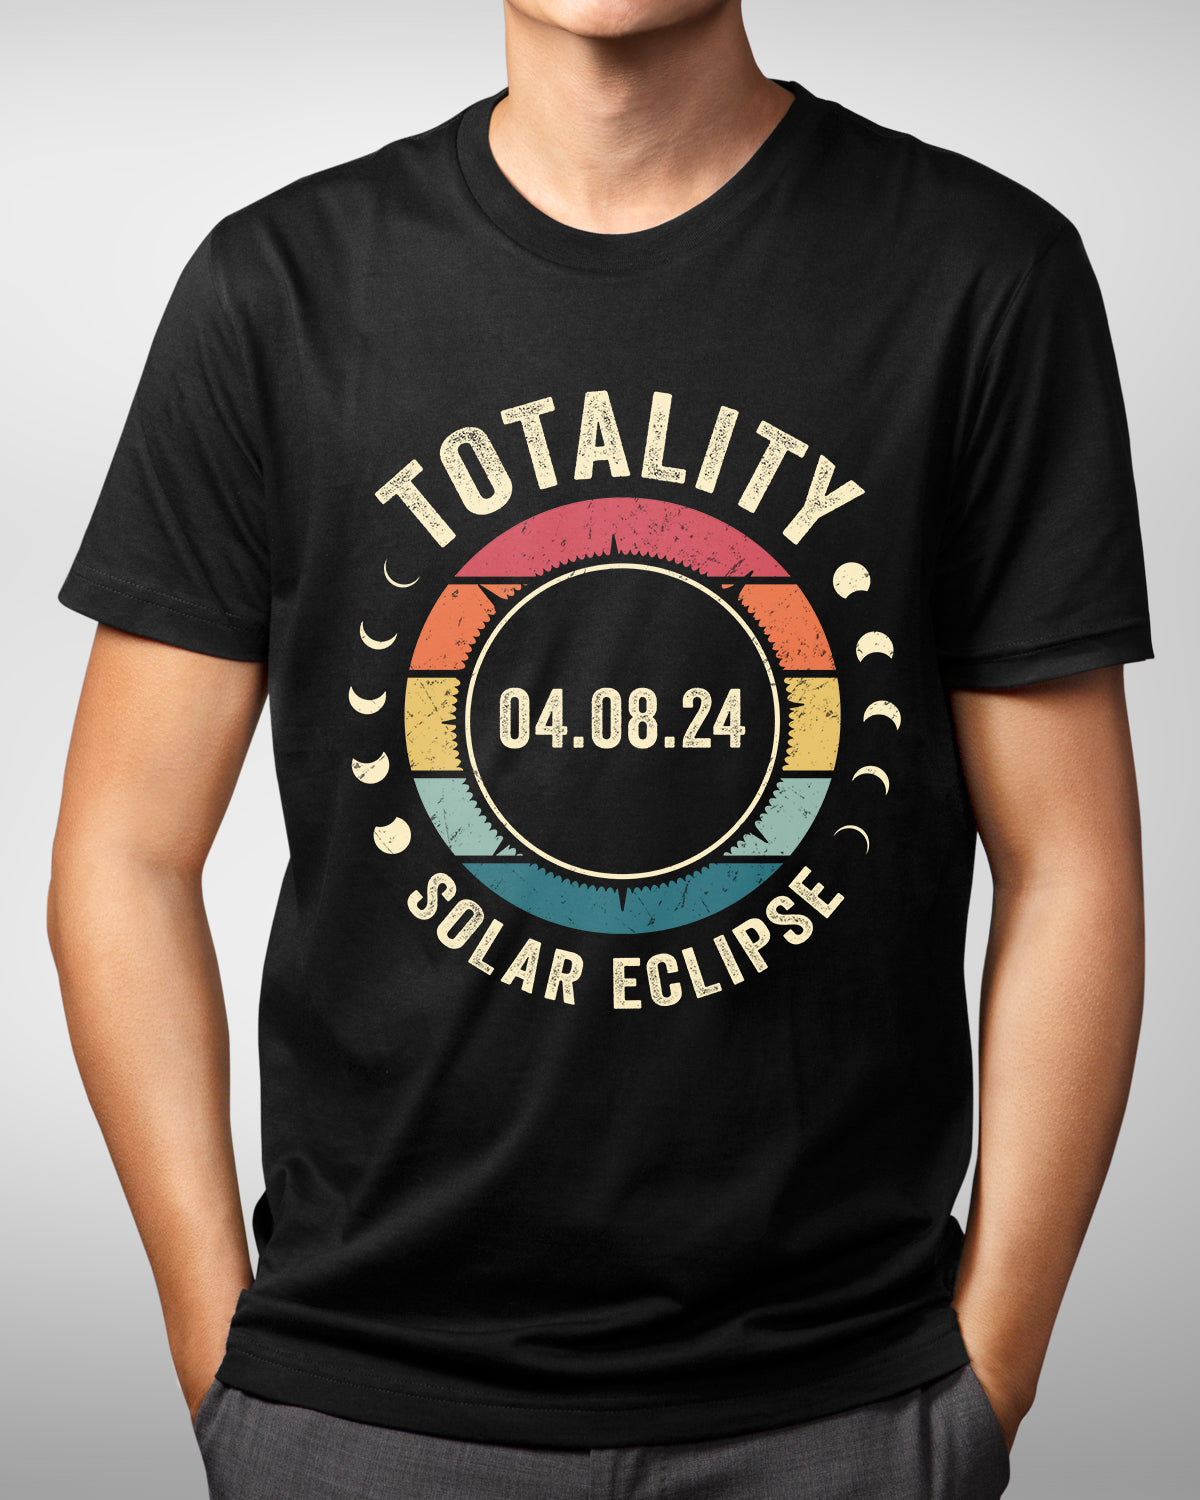 Totality Solar Eclipse Shirt 2024 - Great USA American Eclipse